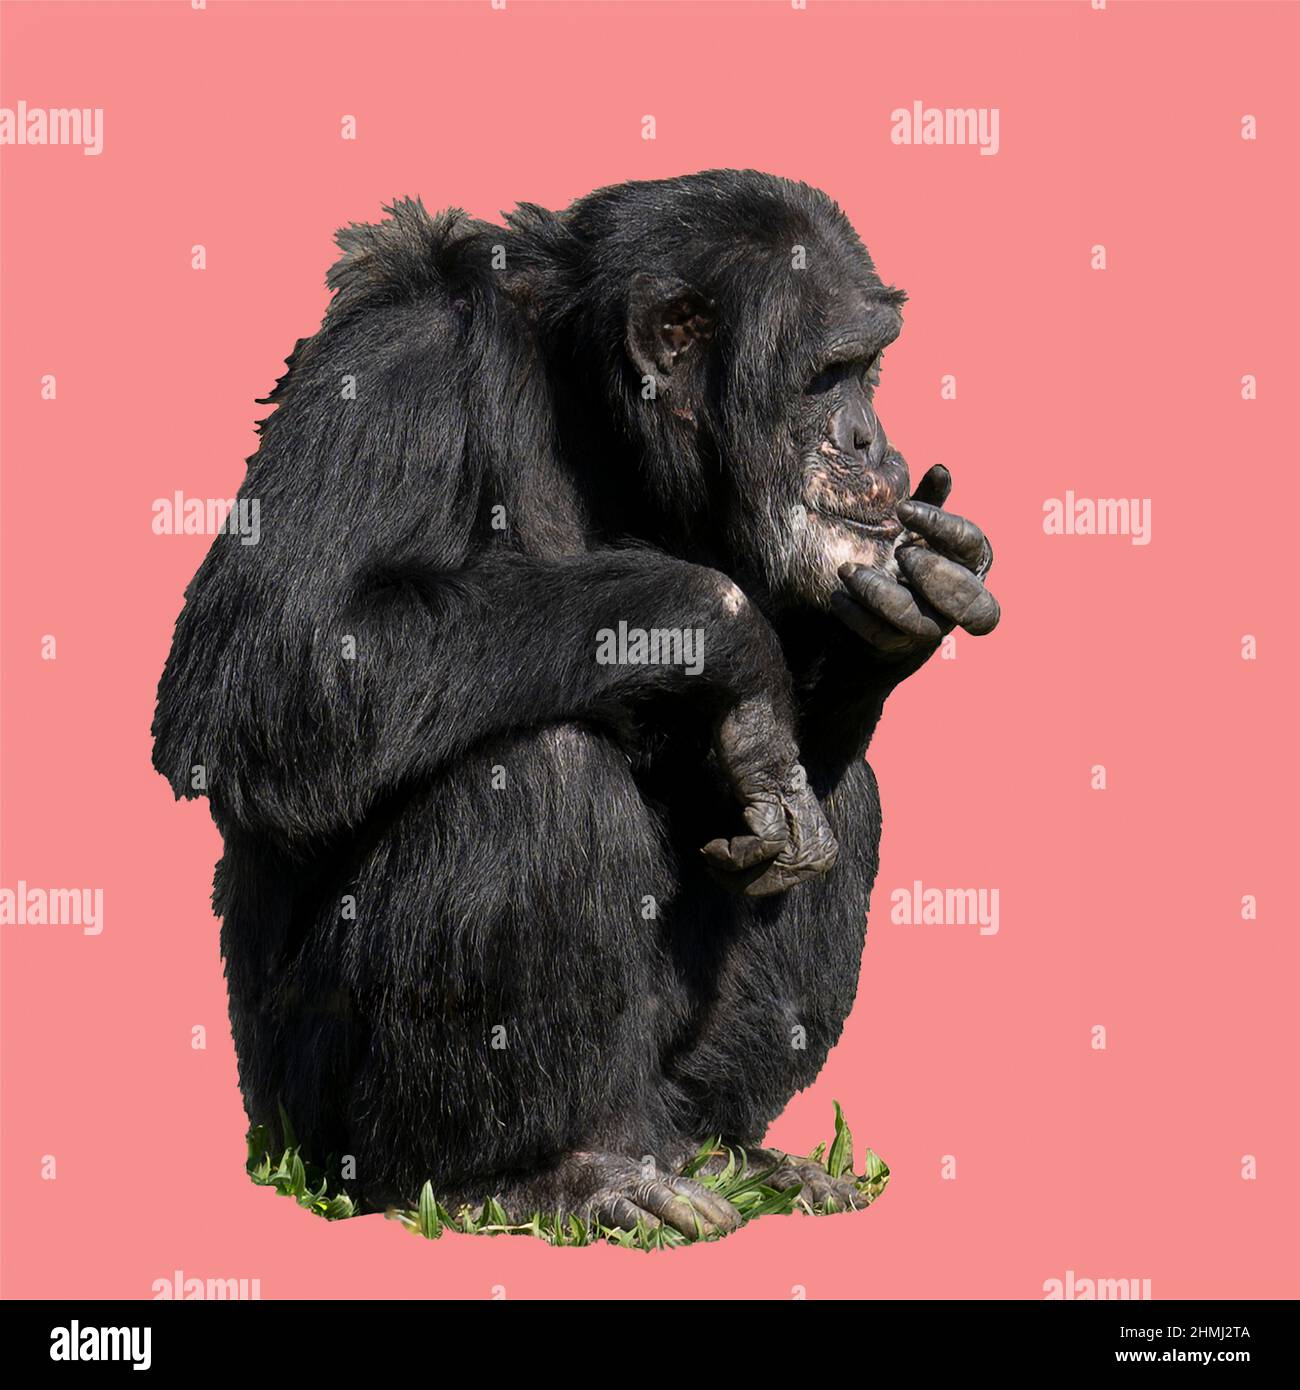 An Adult chimpanzee sitting on the ground isolated with a pink colored background and space for text Stock Photo